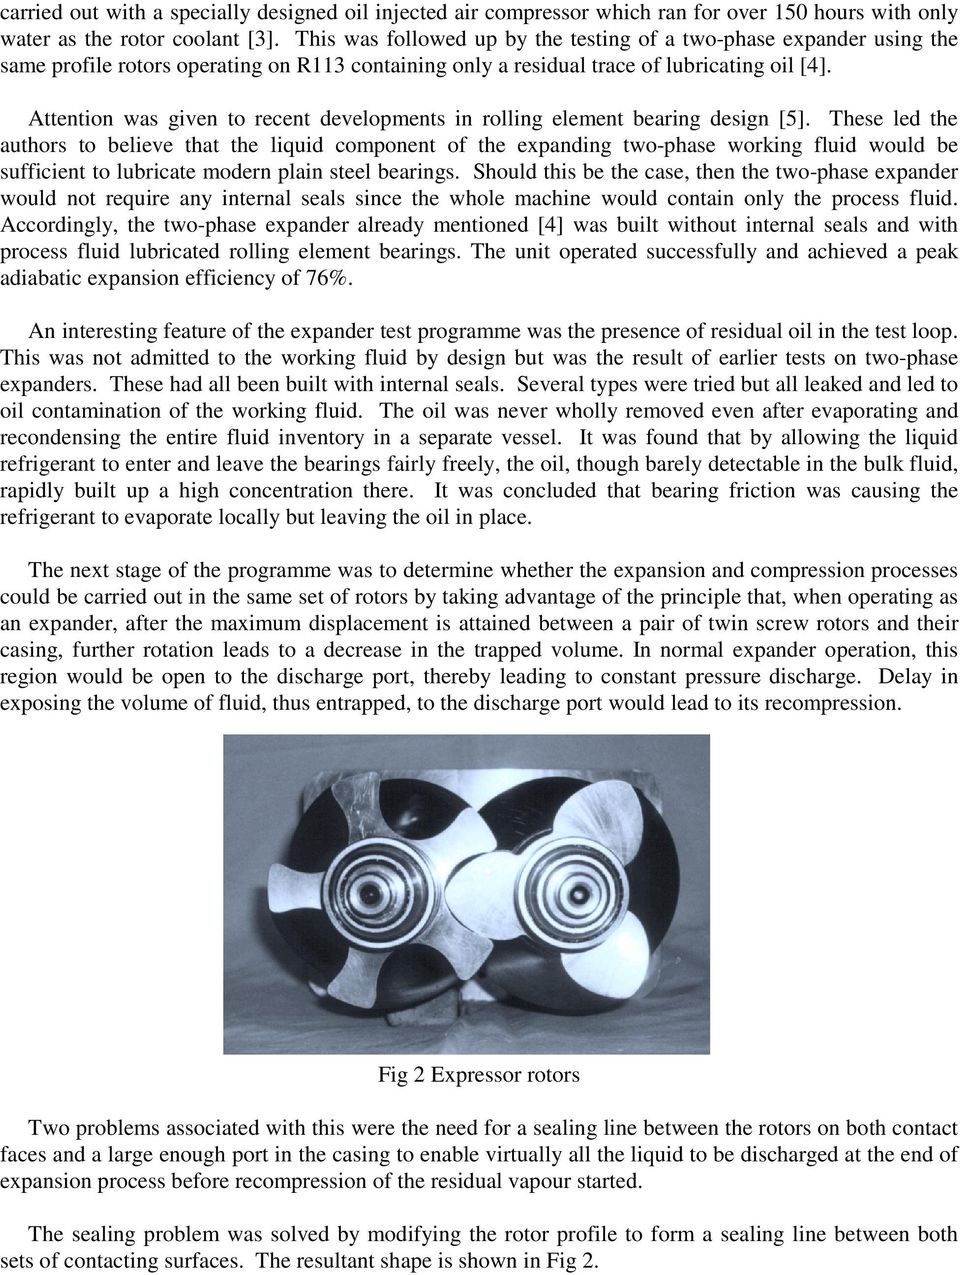 Attention was given to recent developments in rolling element bearing design [5].